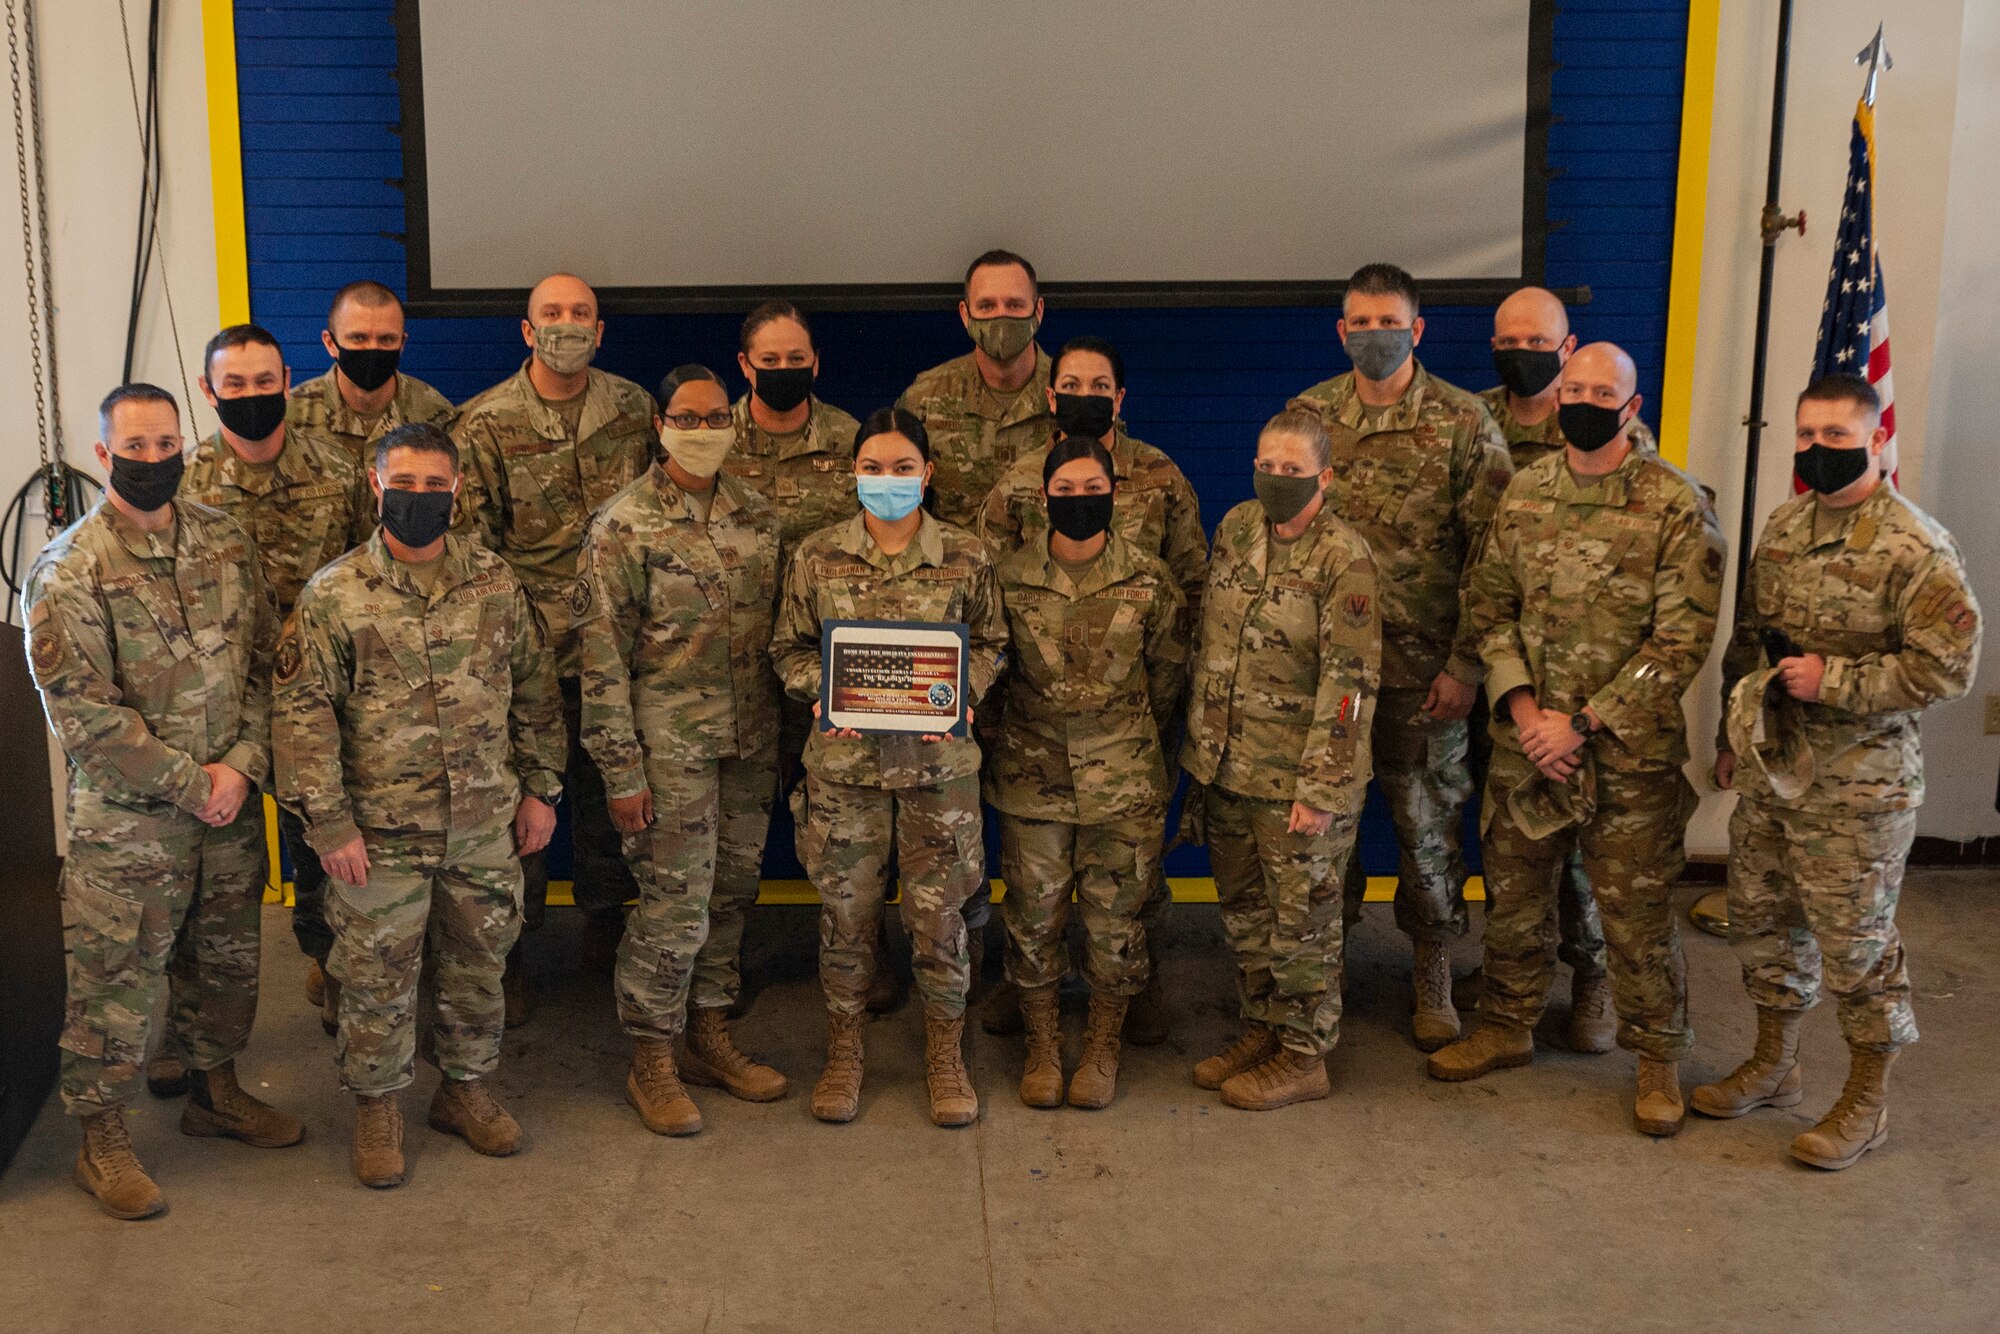 Photo of Airmen standing with an award